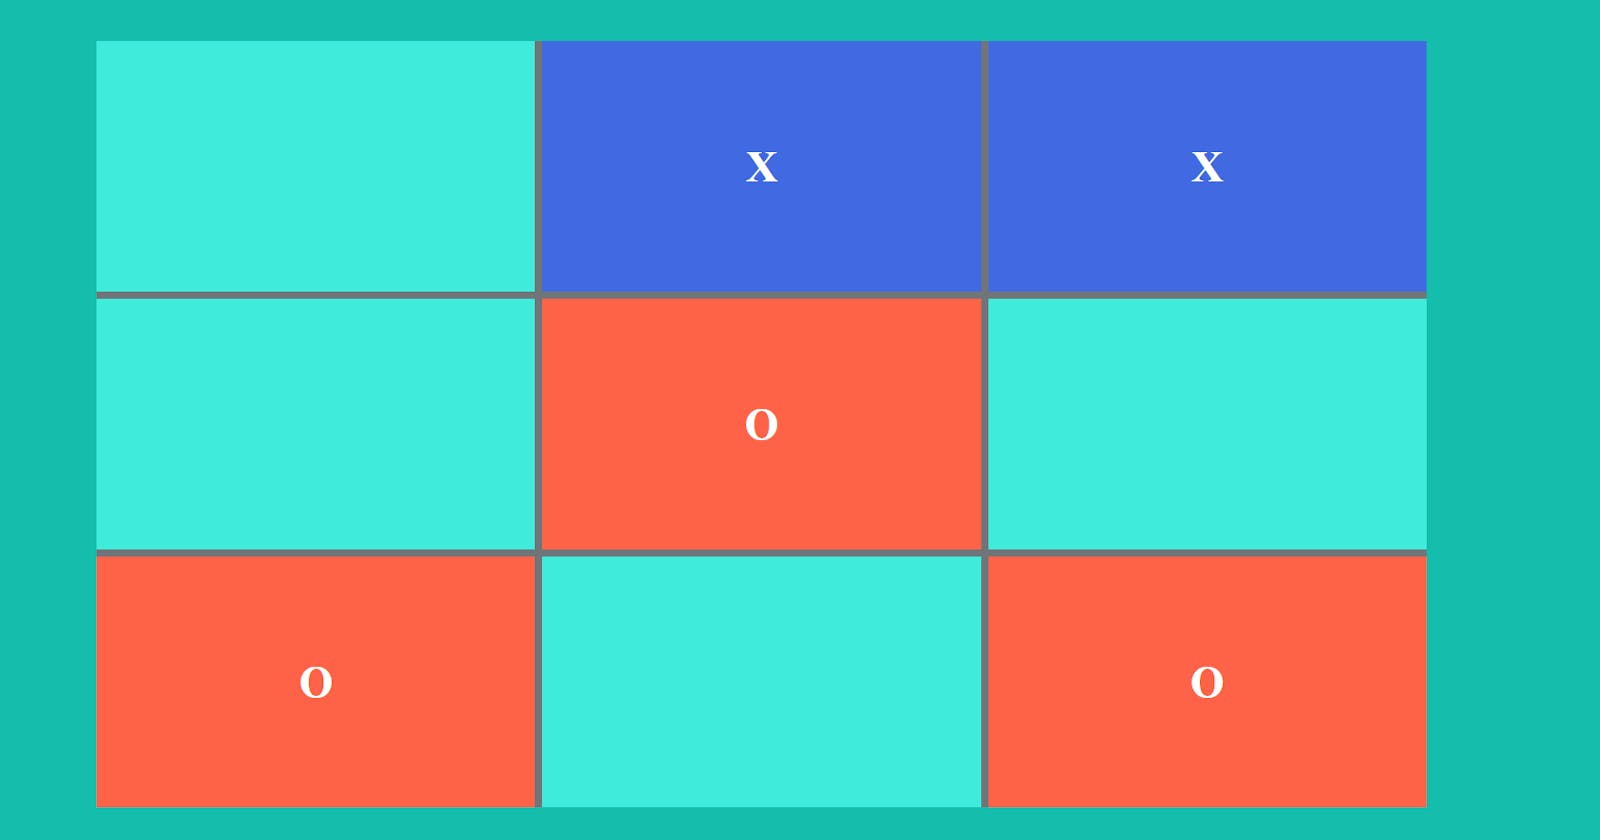 Tic Tac Toe Game With HTML and JS